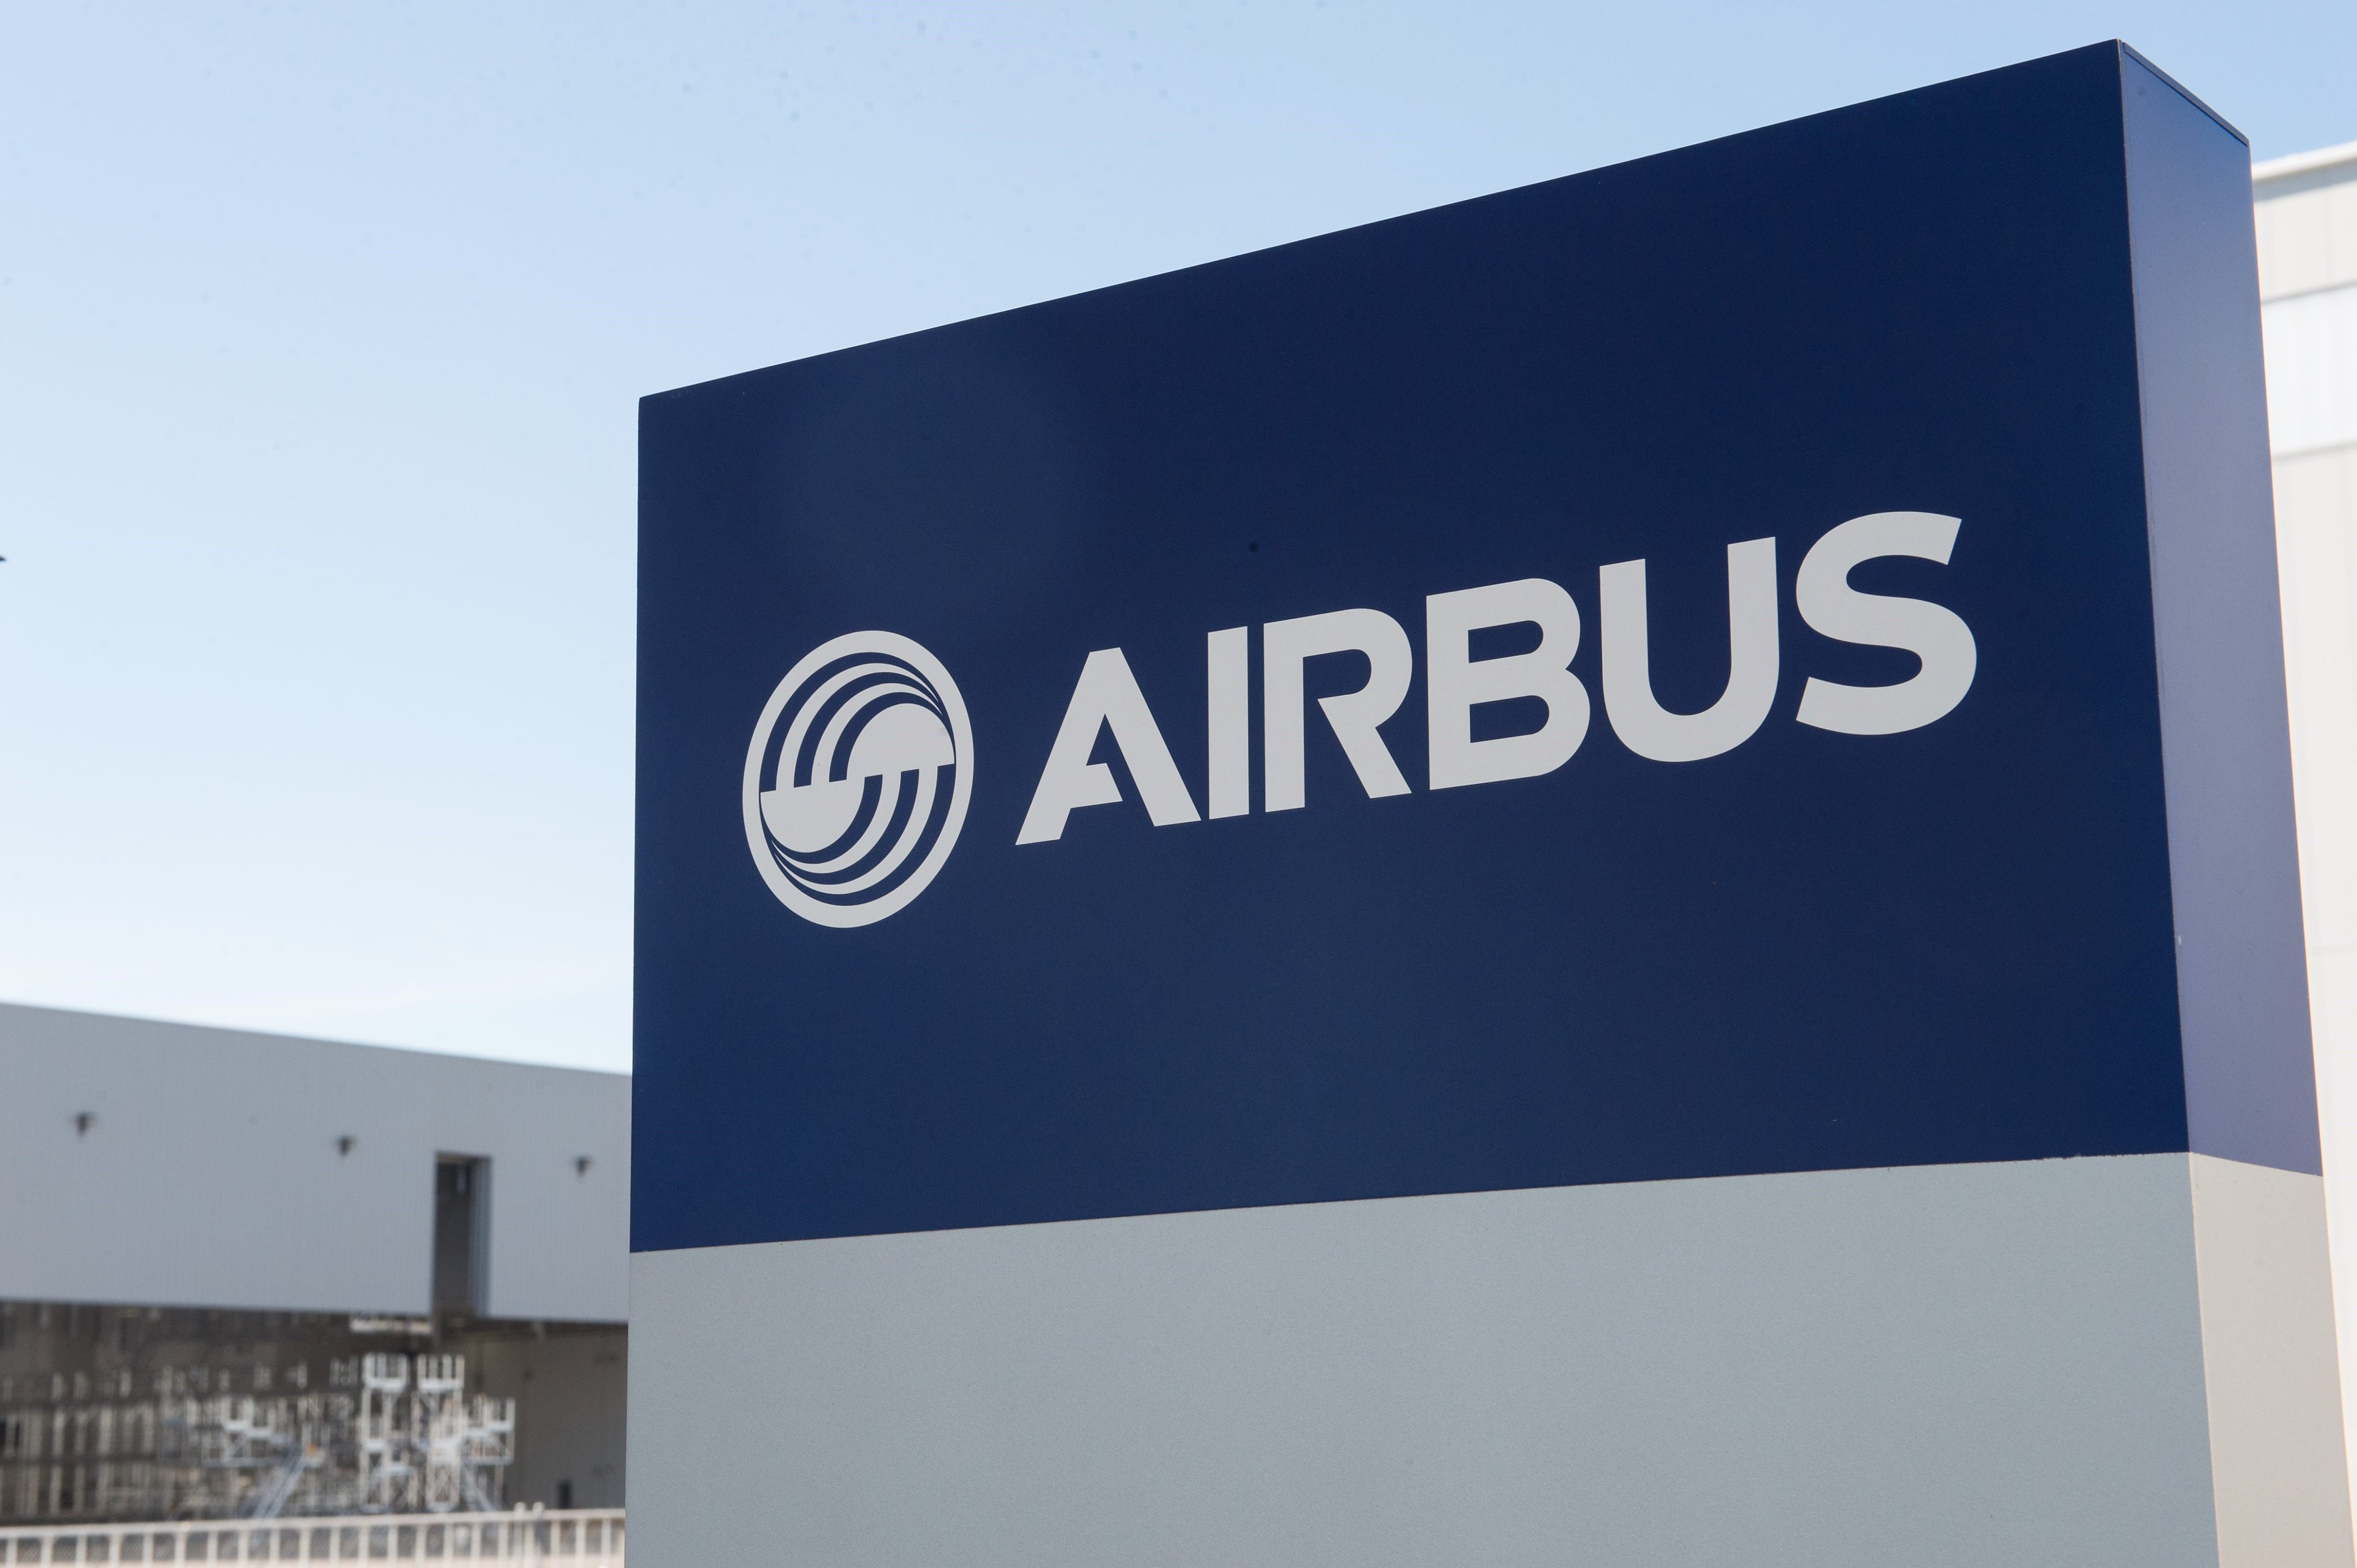 The Airbus logo is seen on the eve of the inauguration of Airbus' first US manufacturing facility in Mobile, Alabama, on Sept. 13, 2015. (Nicholas Kamm—AFP/Getty Images)